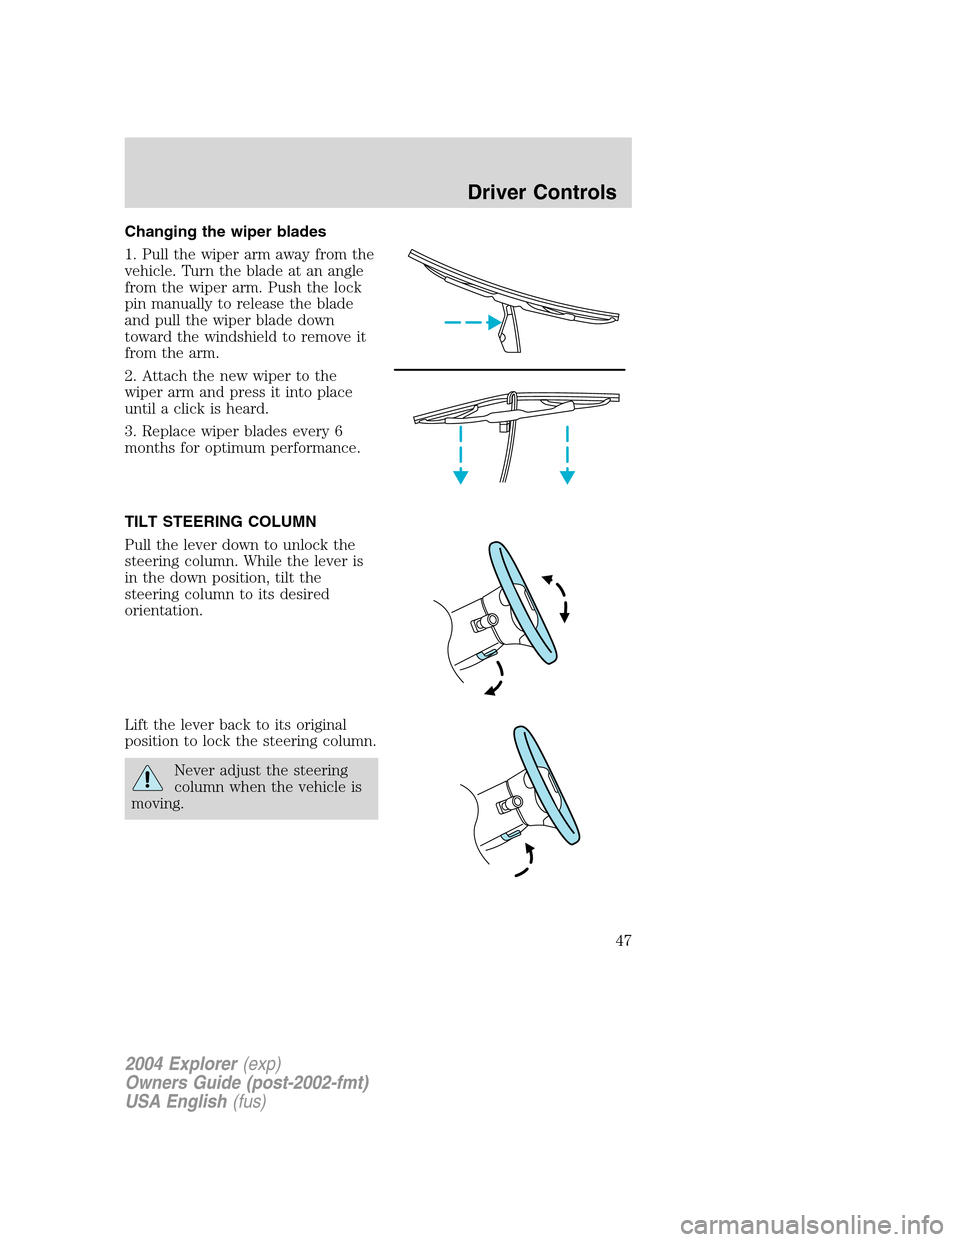 FORD EXPLORER 2004 3.G Owners Manual Changing the wiper blades
1. Pull the wiper arm away from the
vehicle. Turn the blade at an angle
from the wiper arm. Push the lock
pin manually to release the blade
and pull the wiper blade down
towa